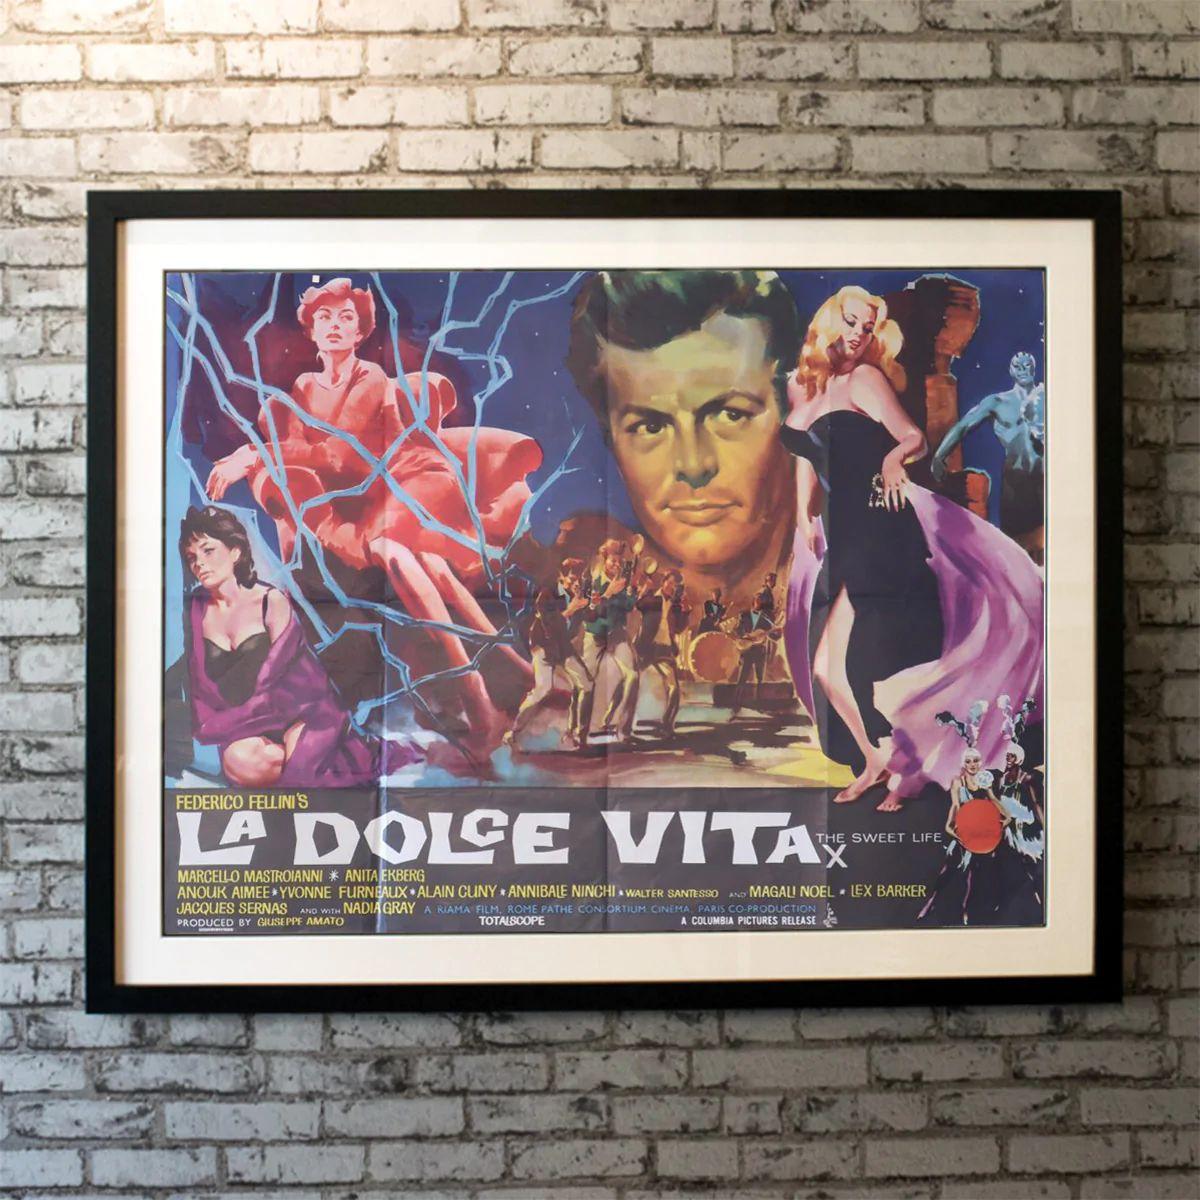 La Dolce Vita, Unframed Poster, 1960

A series of stories following a week in the life of a philandering tabloid journalist living inrome.

Year: 1960
Nationality: United Kingdom
Condition: Folded-as-Issued
Type: Original British Quad
Size: 30 X 40